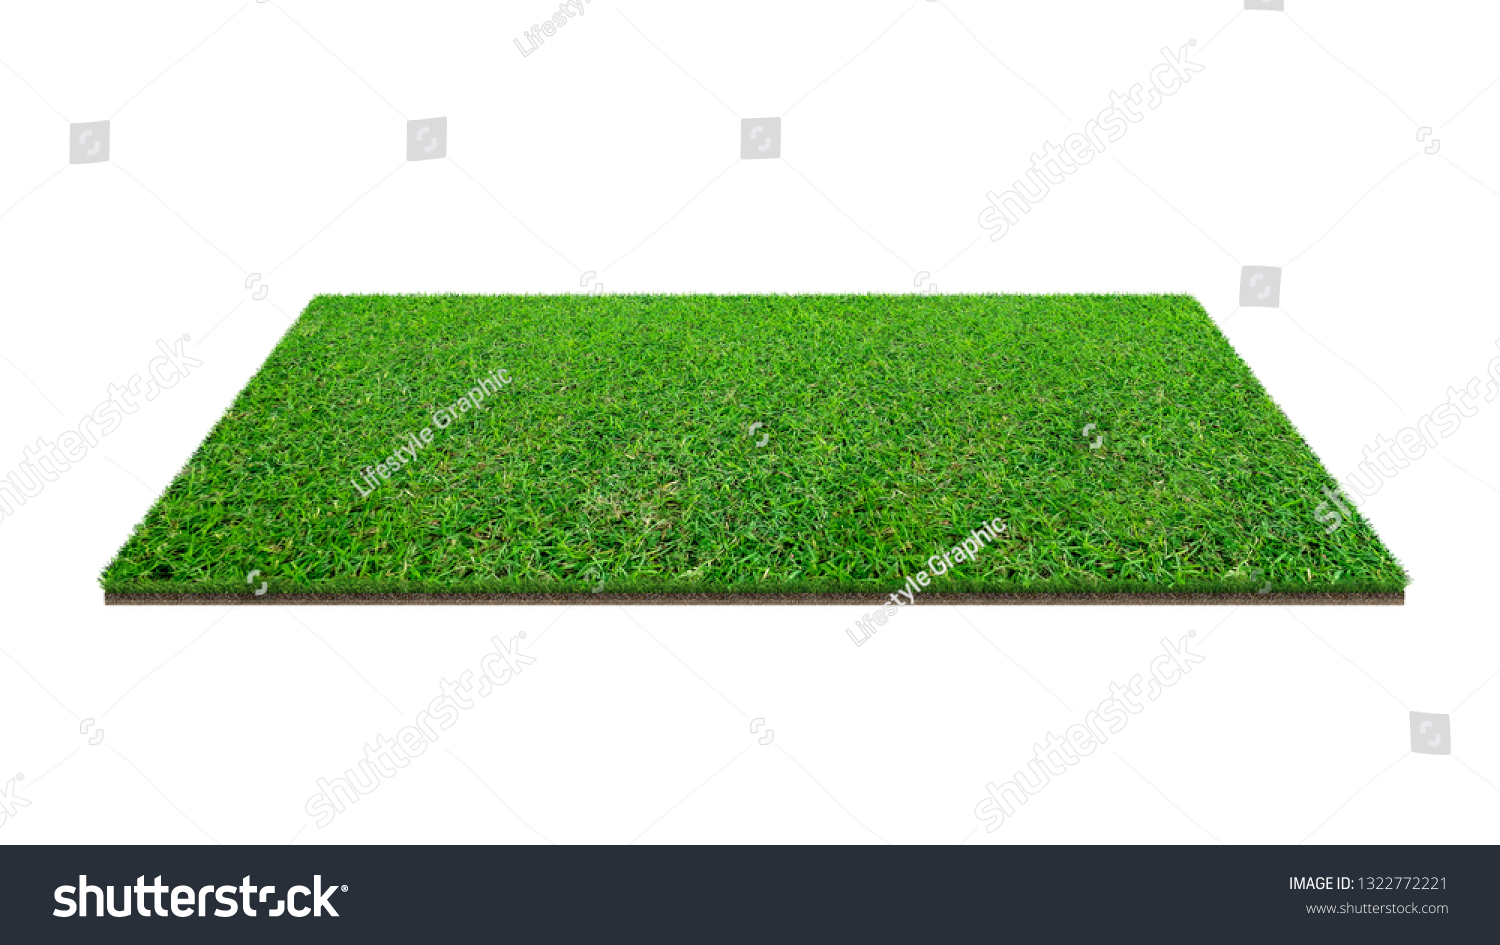 Green grass field isolated on white with clipping path. Artificial lawn grass carpet for sport background. Background for landscape, park and outdoor. #1322772221